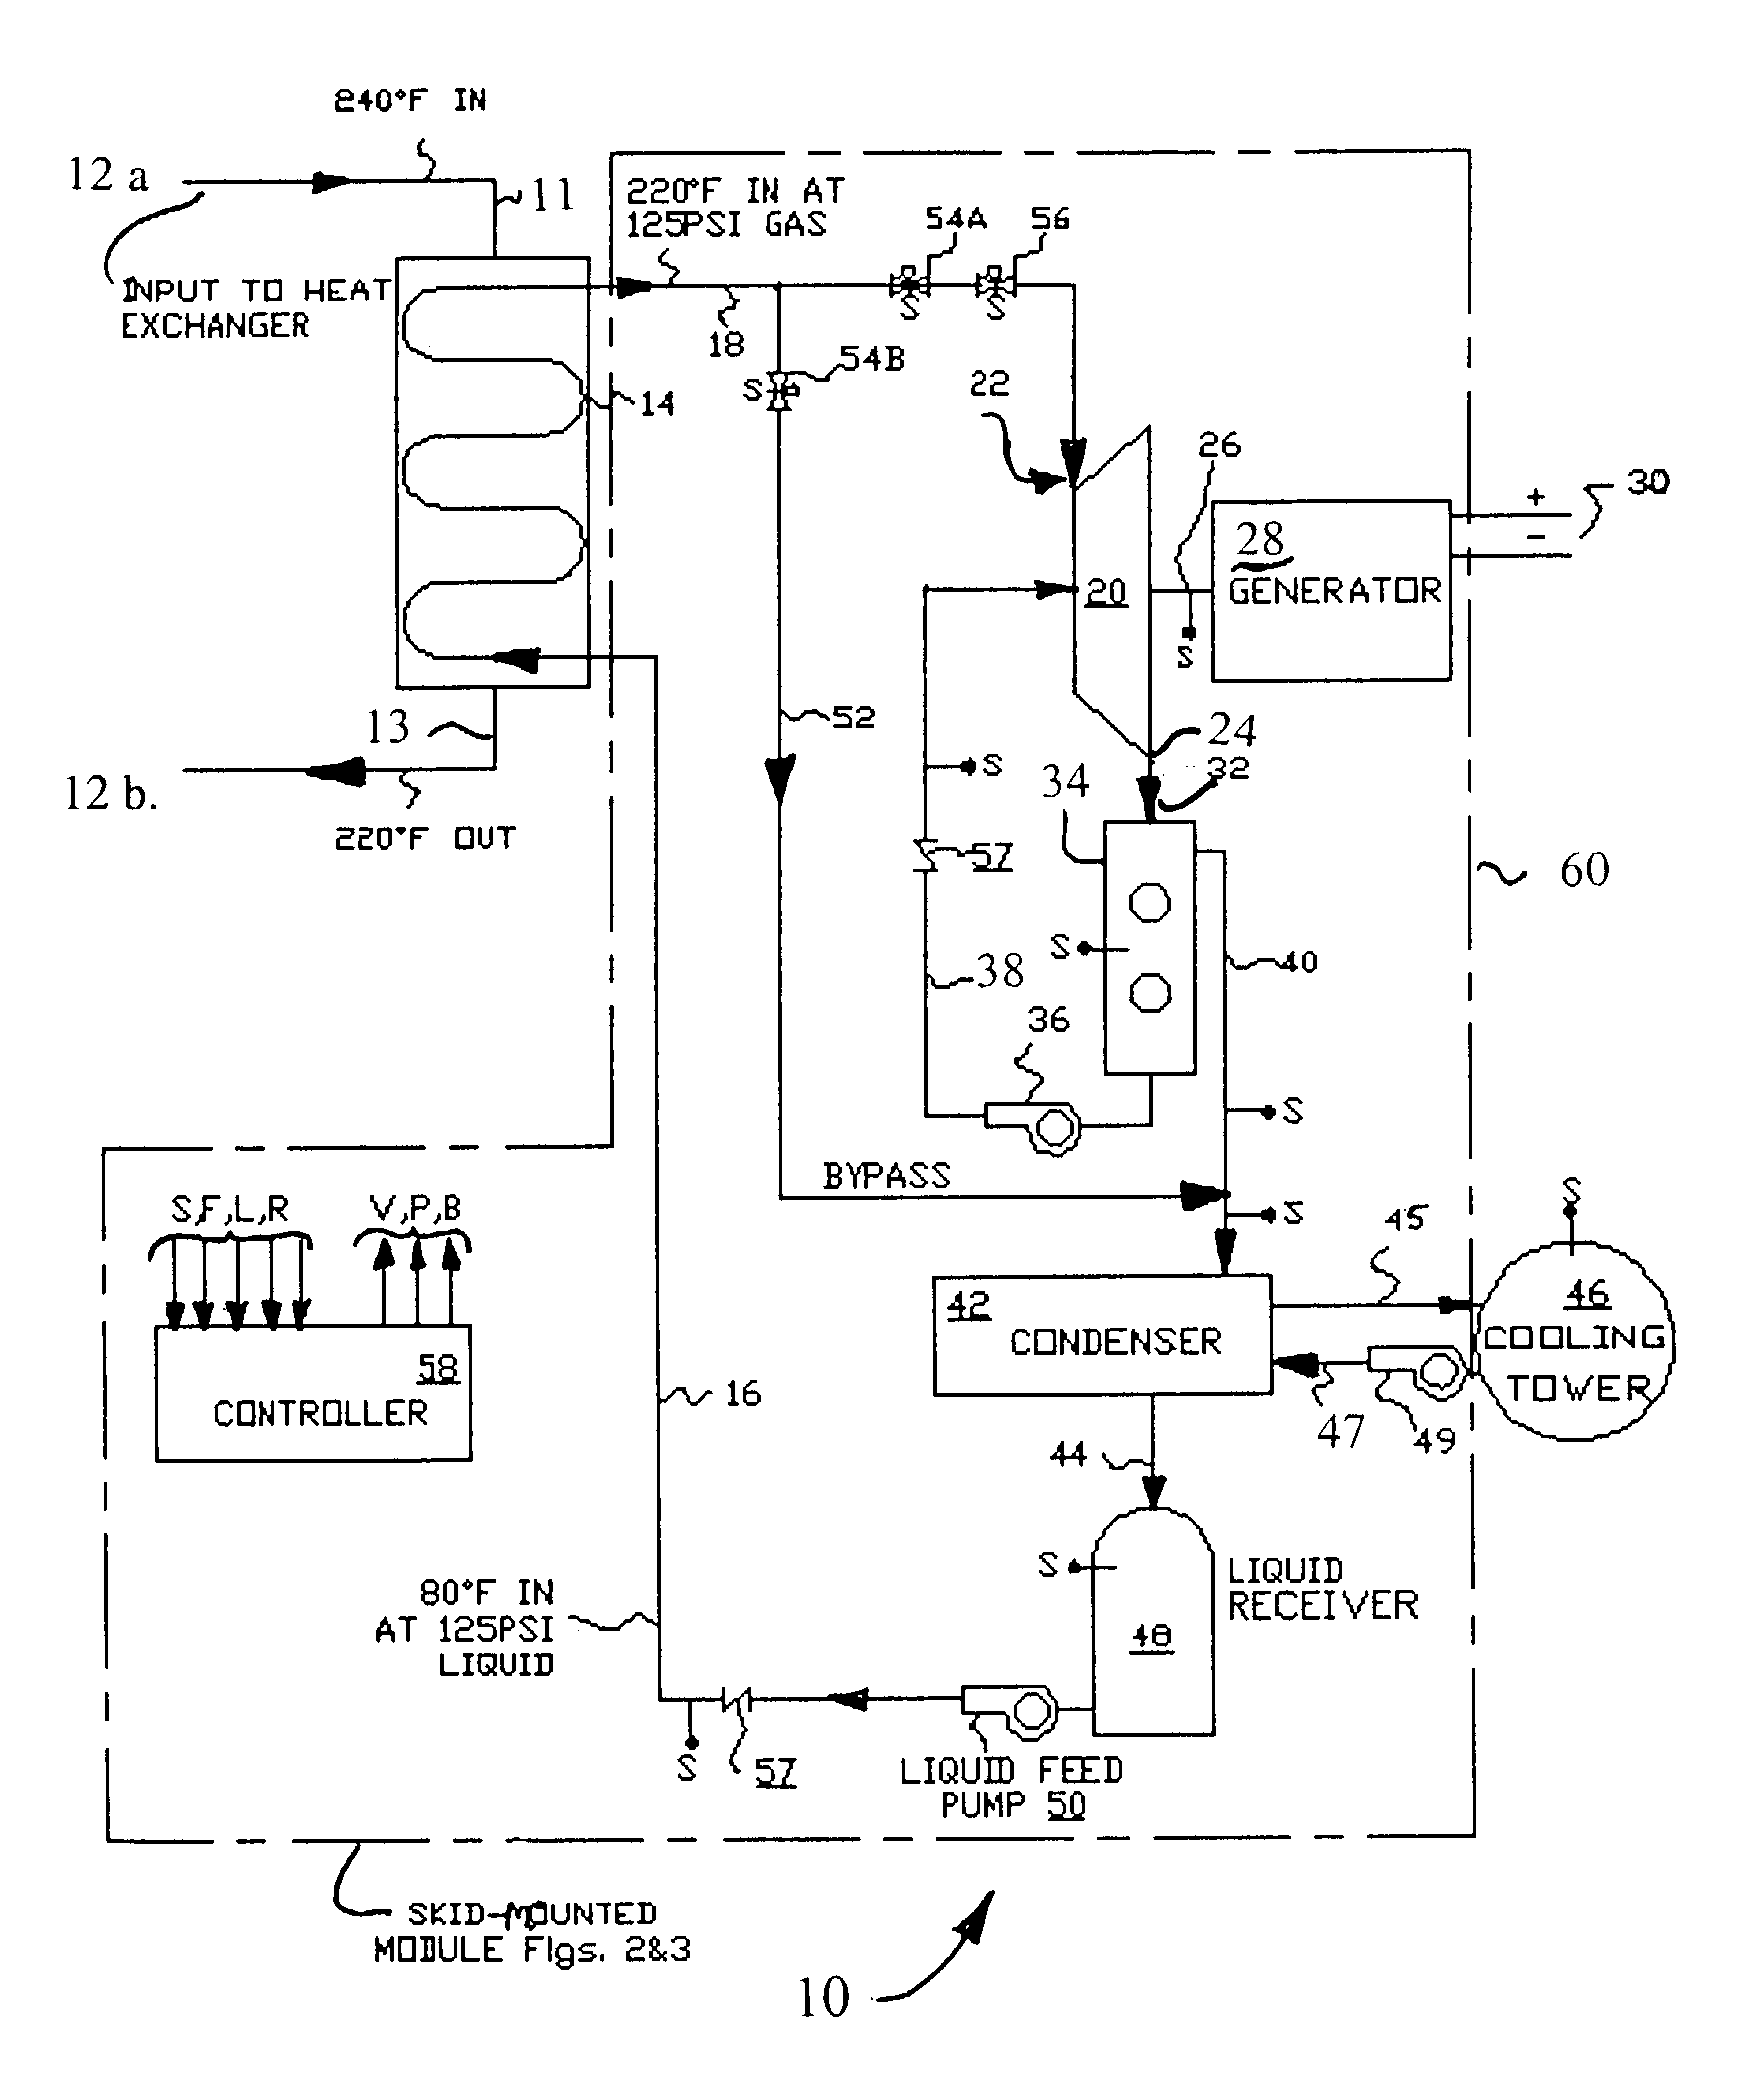 System and method for generation of electricity and power from waste heat and solar sources